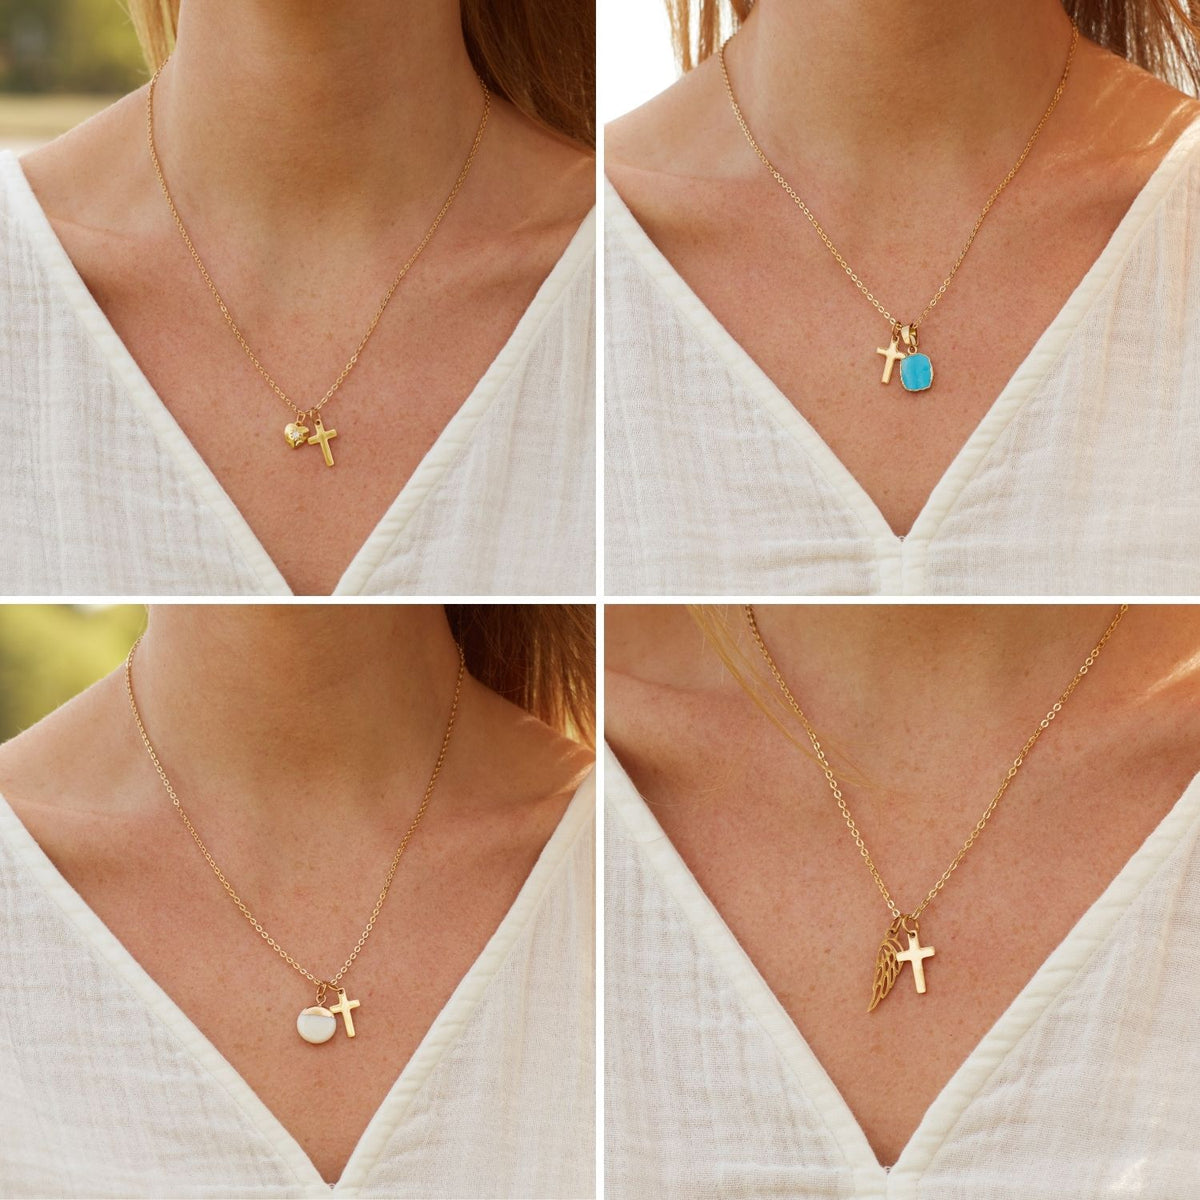 To My Incredible Daughter in Law | My Daughter in Heart | Cross Necklace